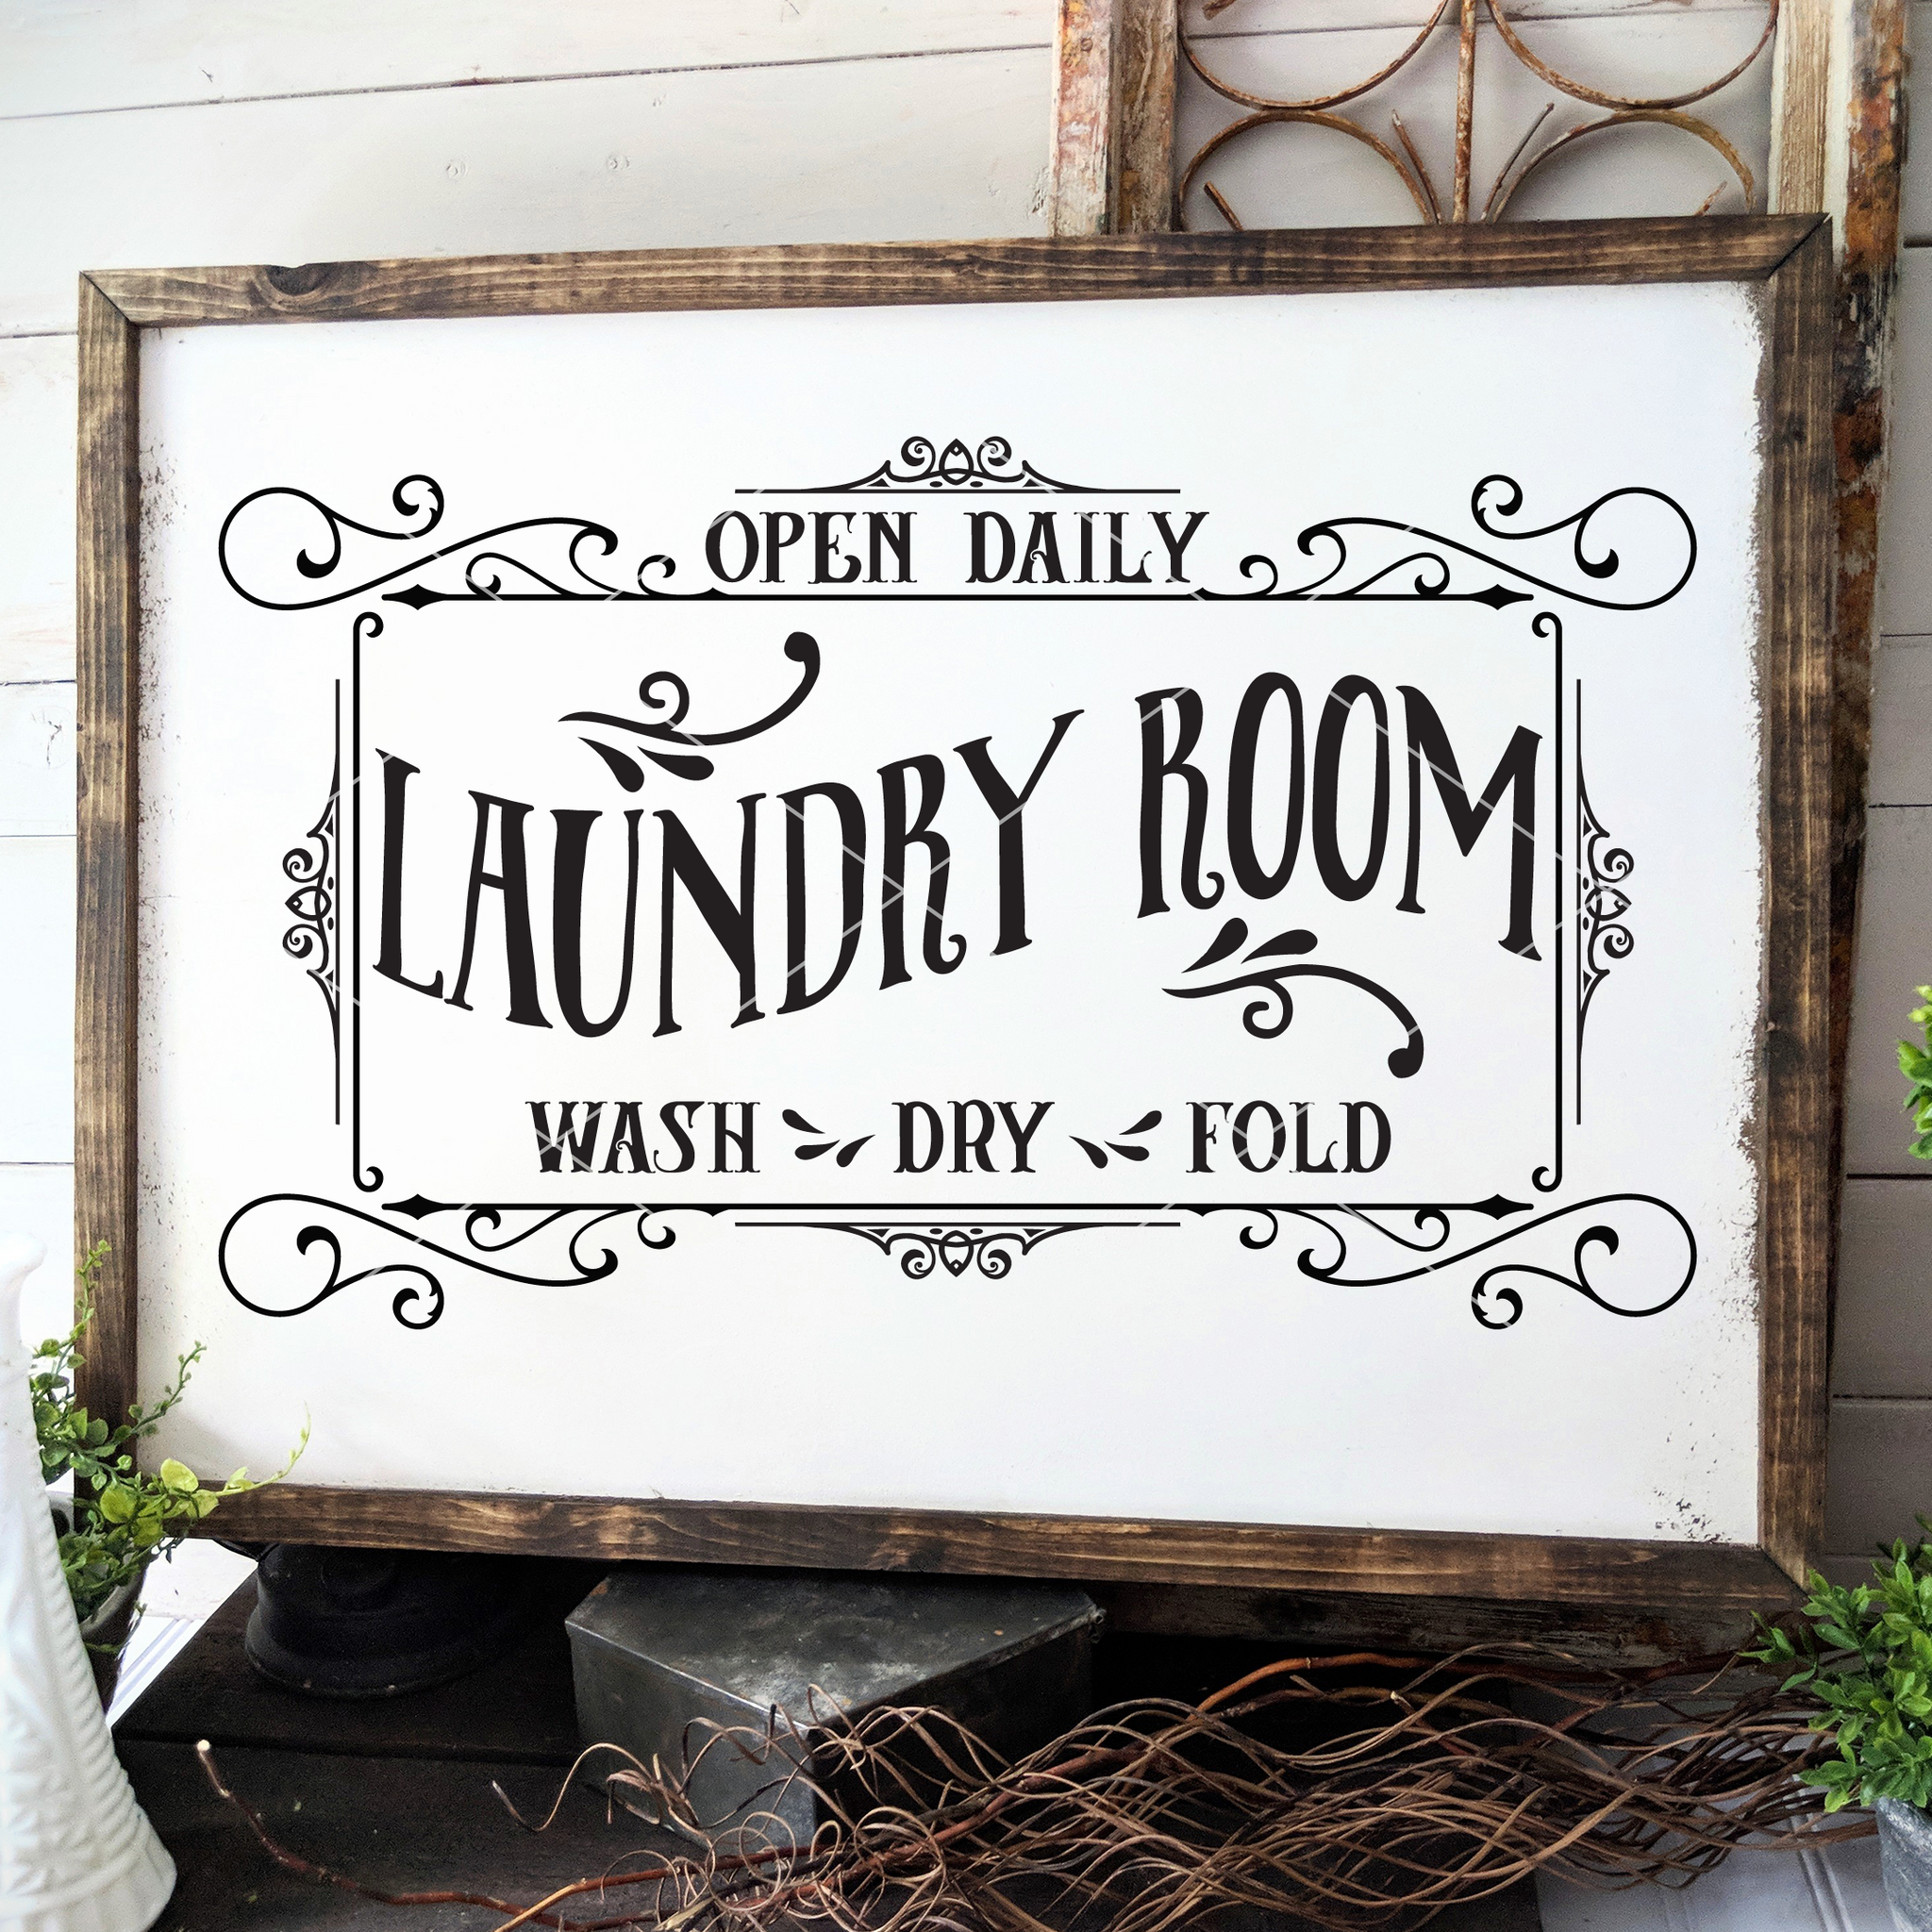 Laundry Room SVG File for Cricut/Silhouette (Style 3) - Commercial Use SVG Files for Cricut & Silhouette